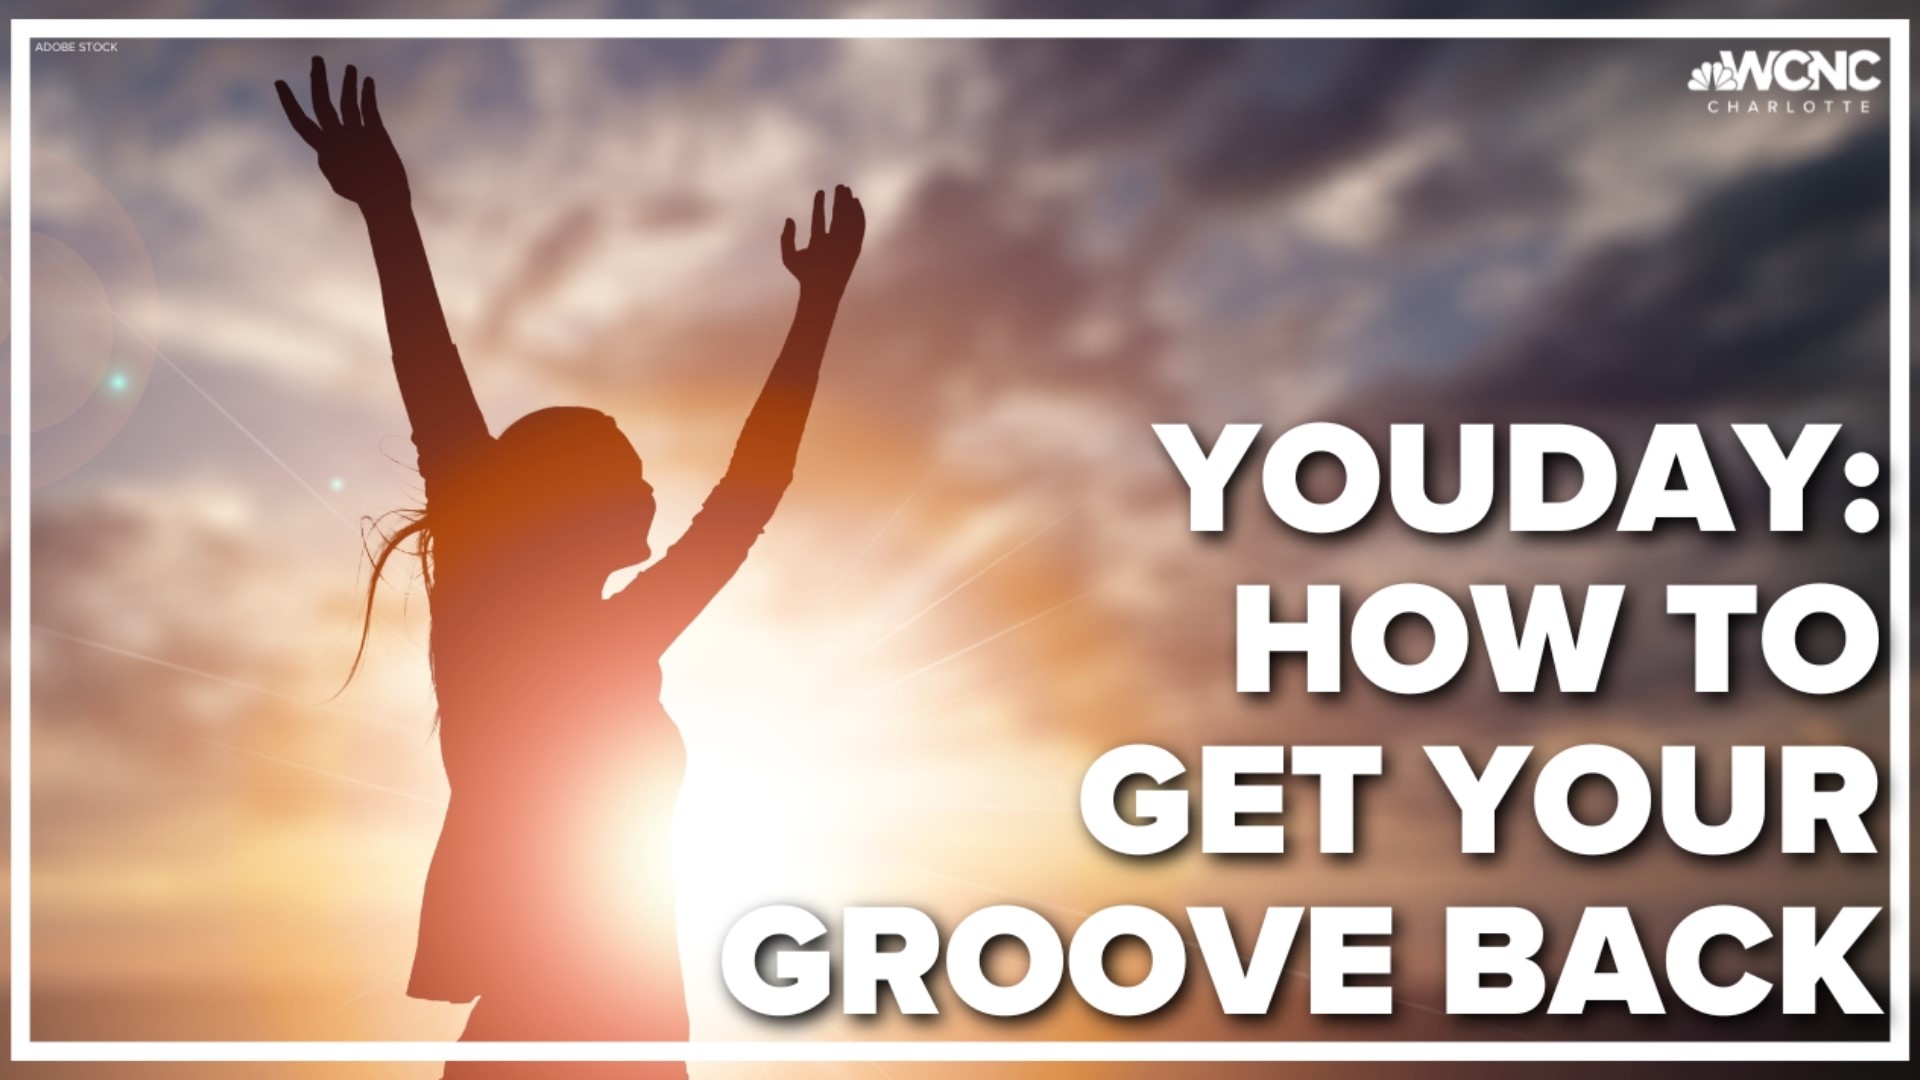 Coach Lamonte has some tips to help get your groove back.